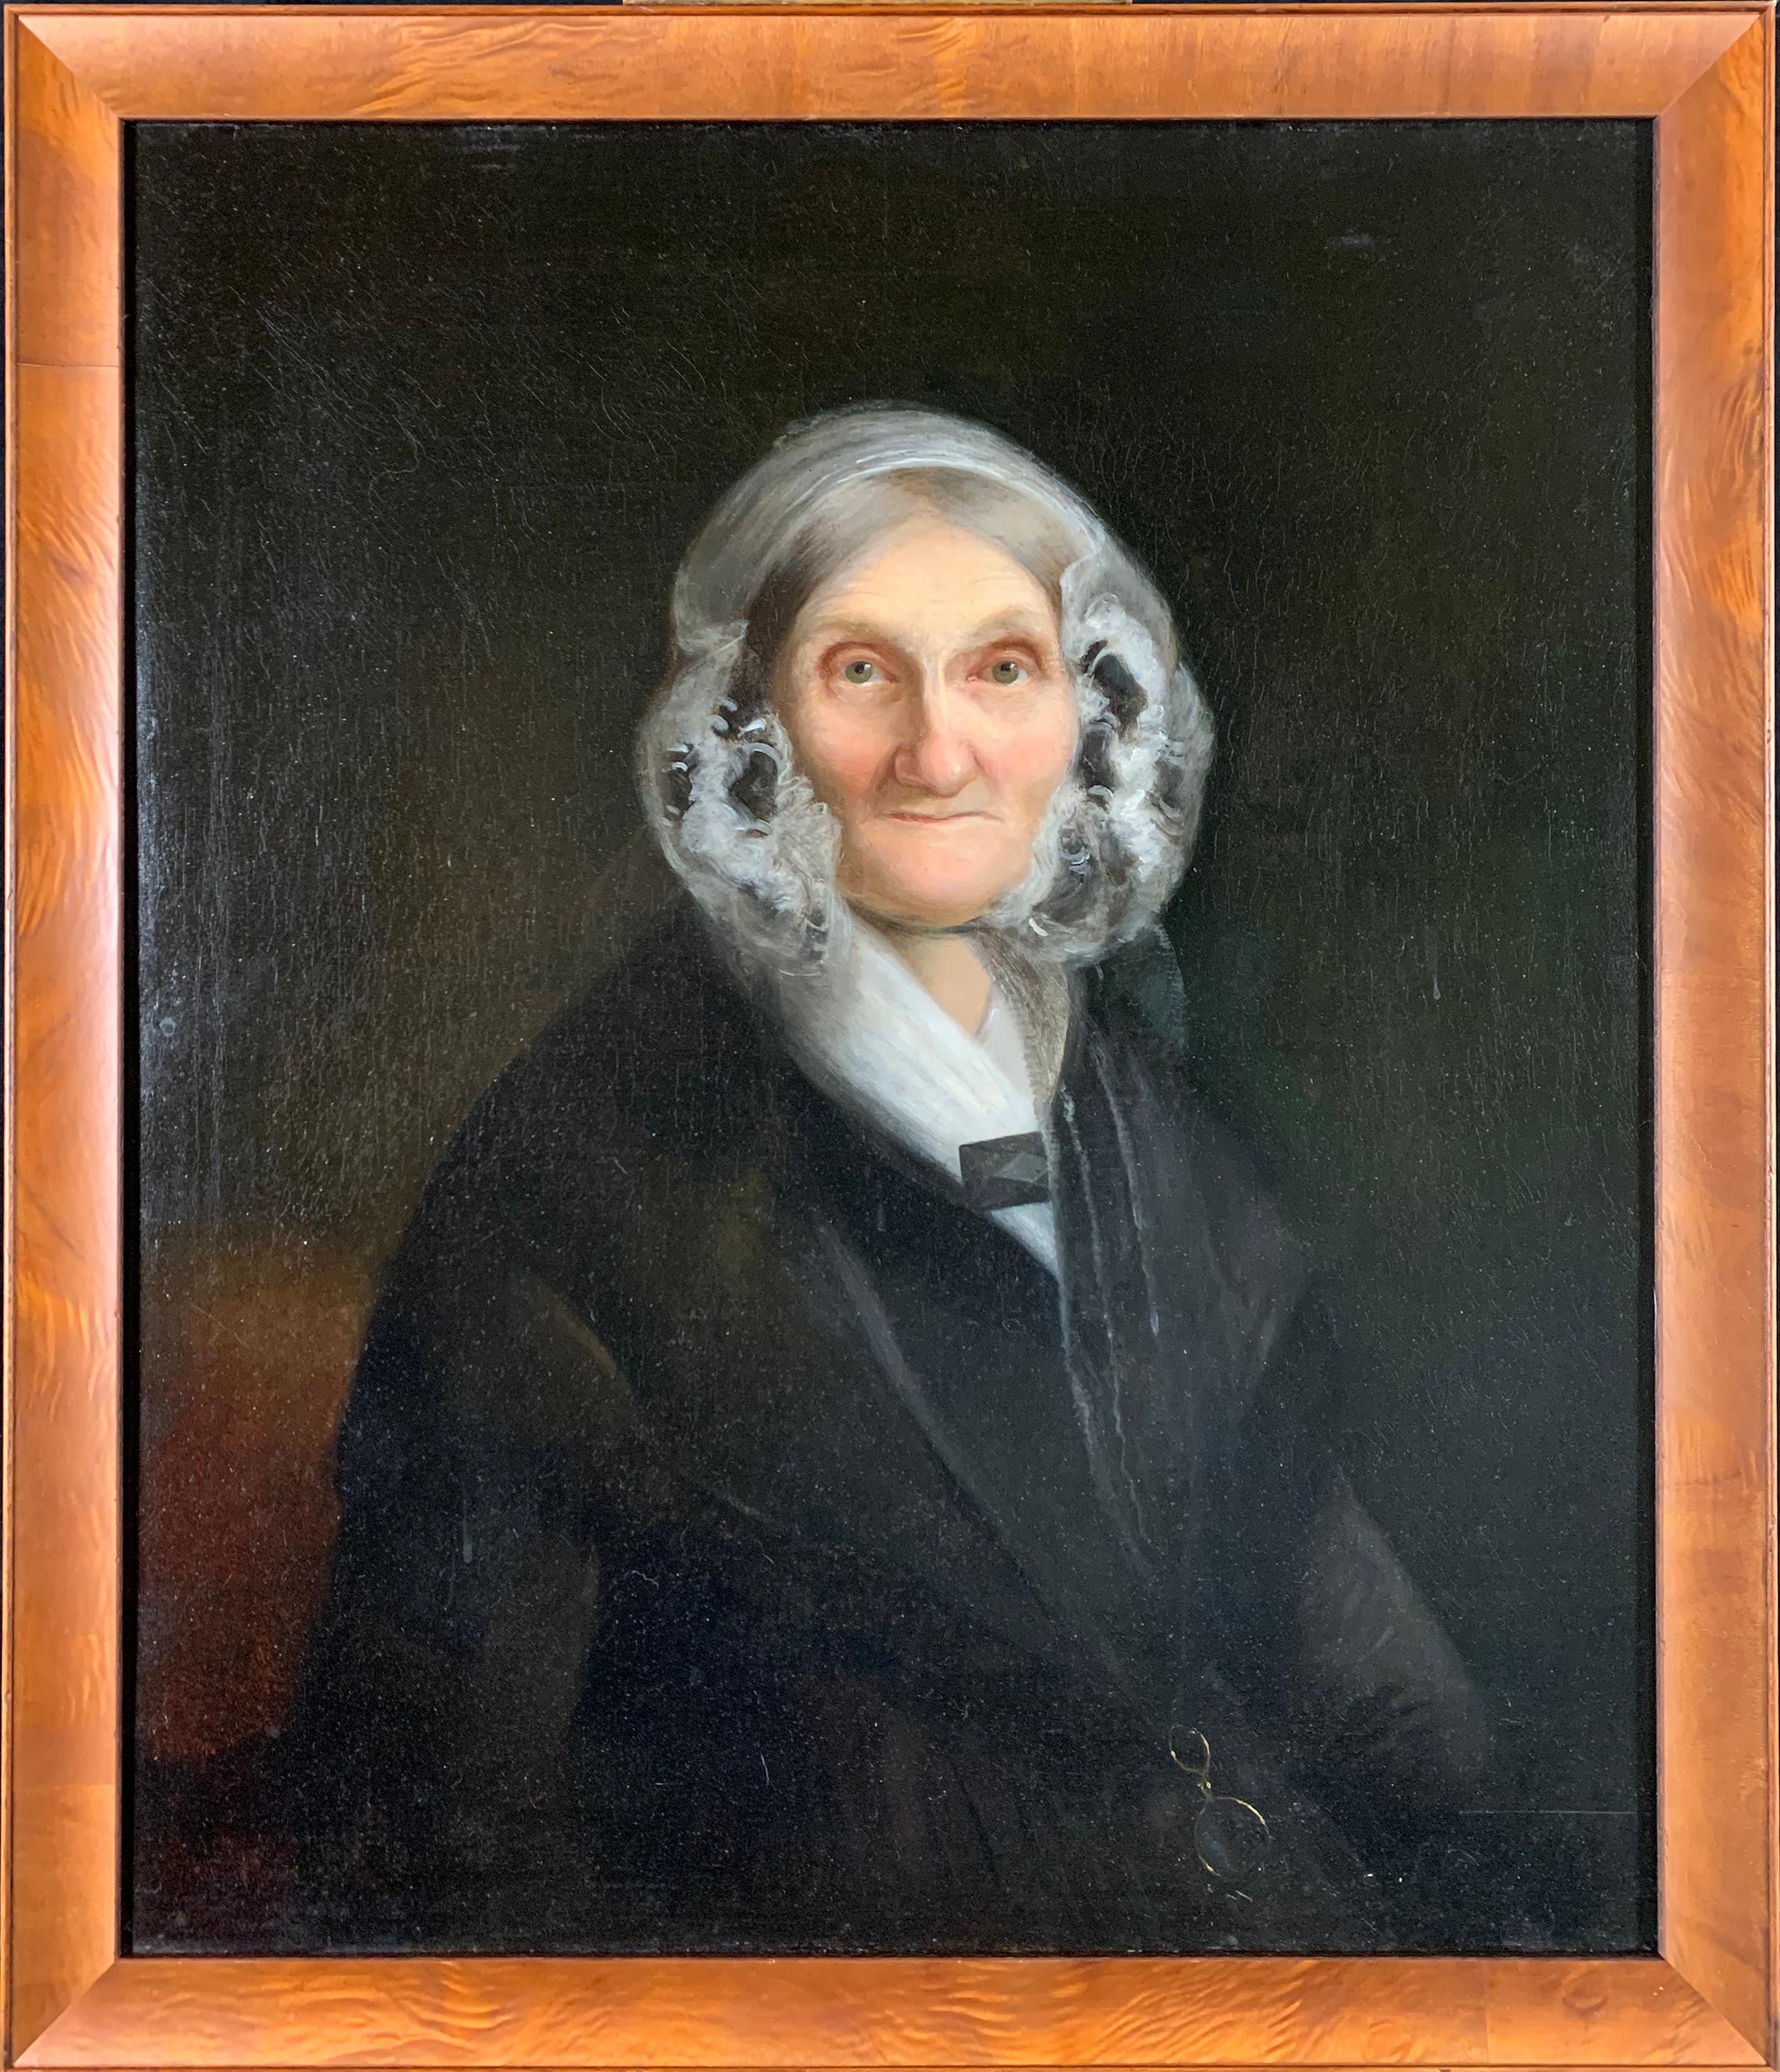 Unknown Portrait Painting - Portrait of an Elderly Lady, Oil on Canvas, 1840's, In Style of Jacob Eichholtz